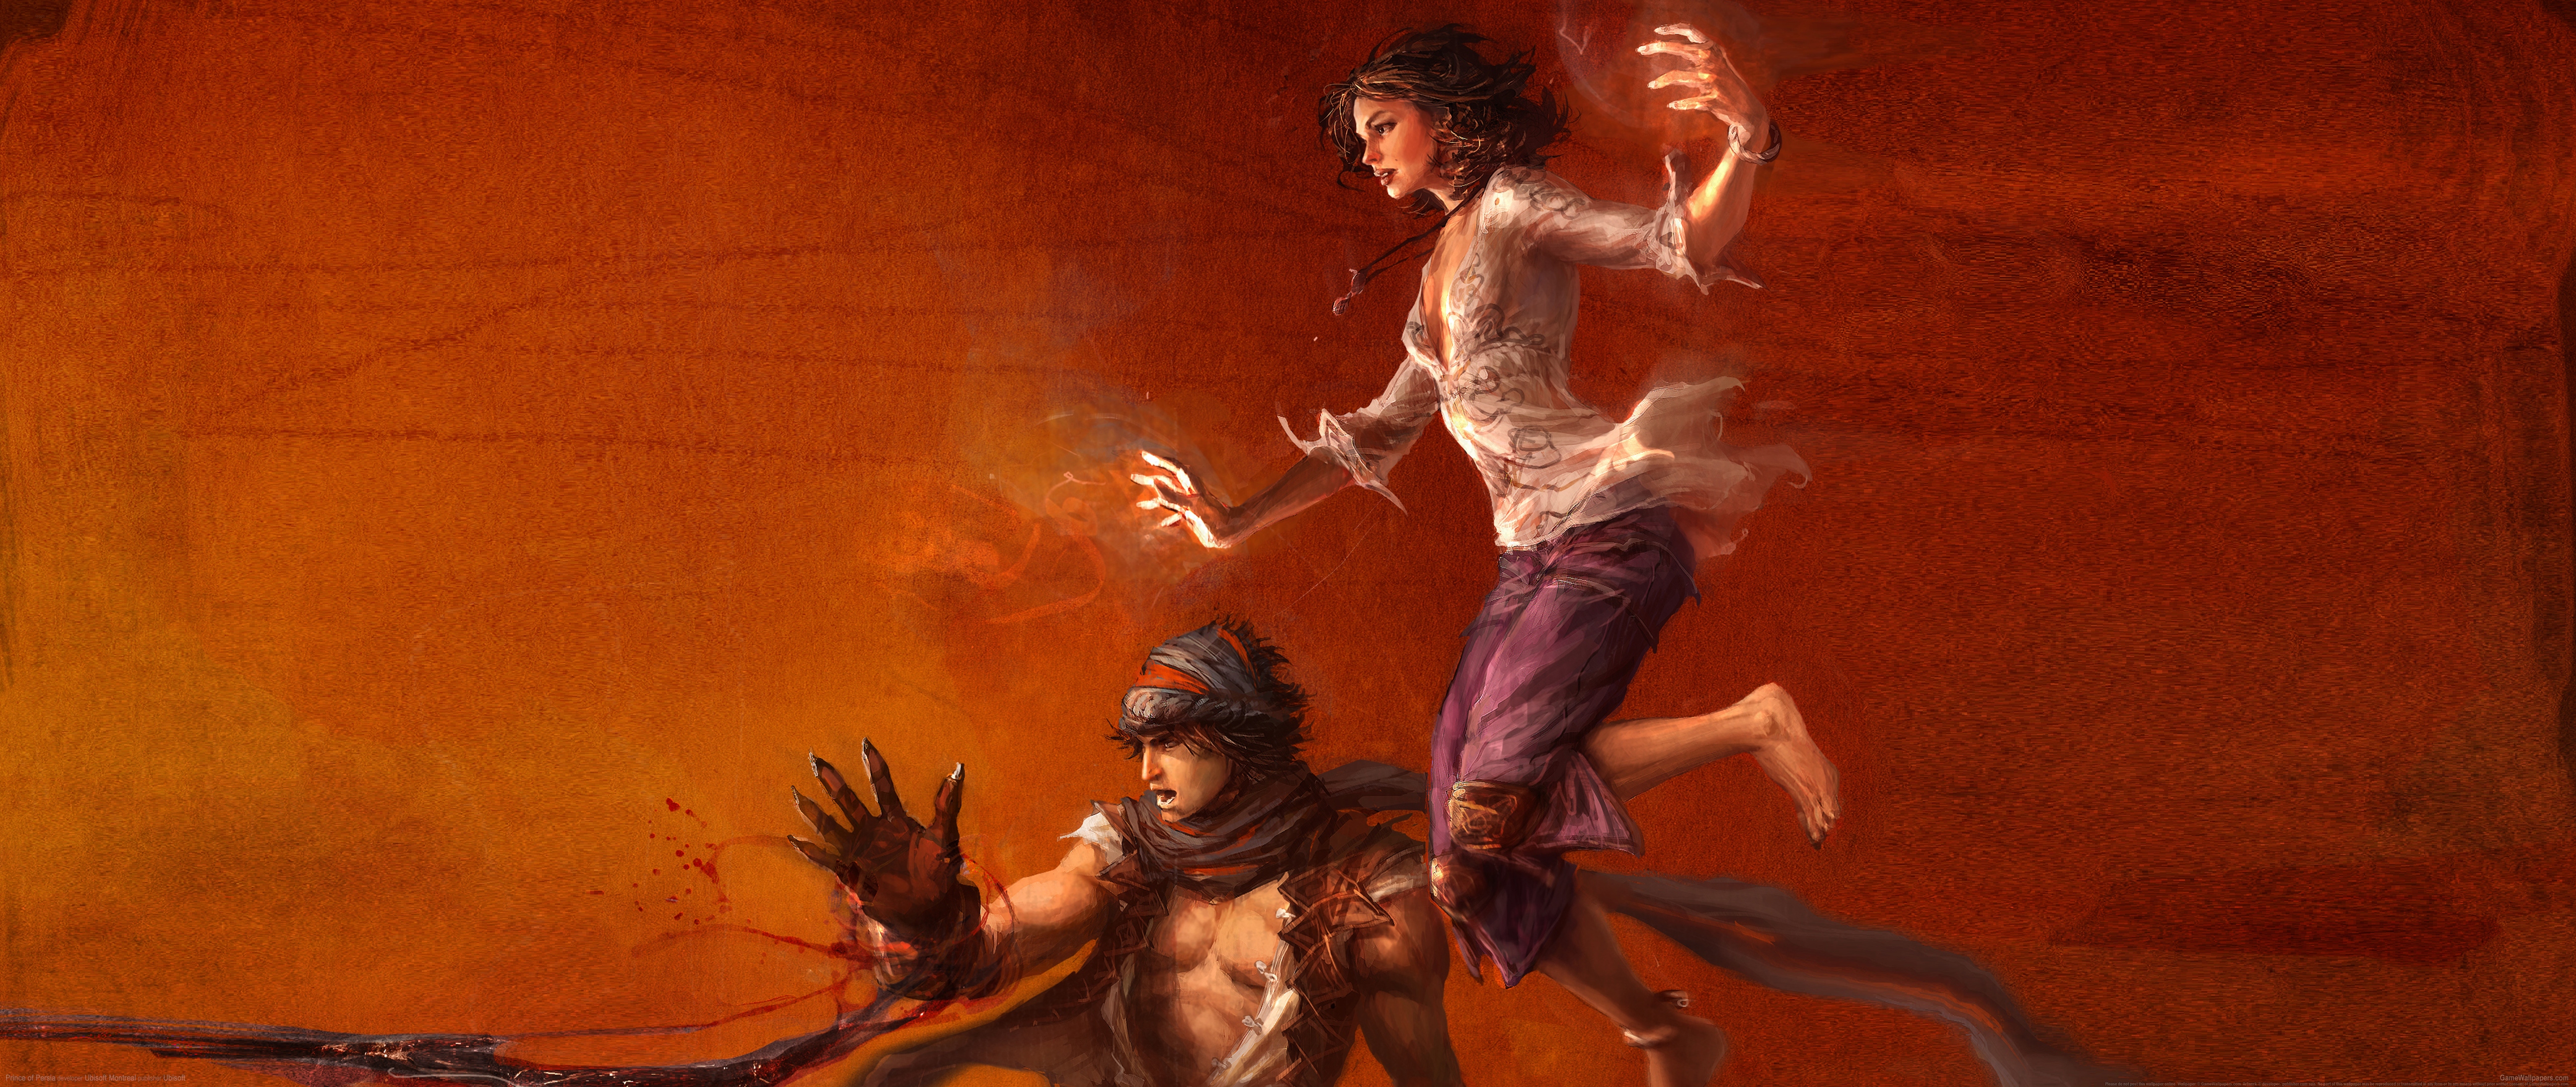 Prince of Persia 5120x2160 achtergrond 07